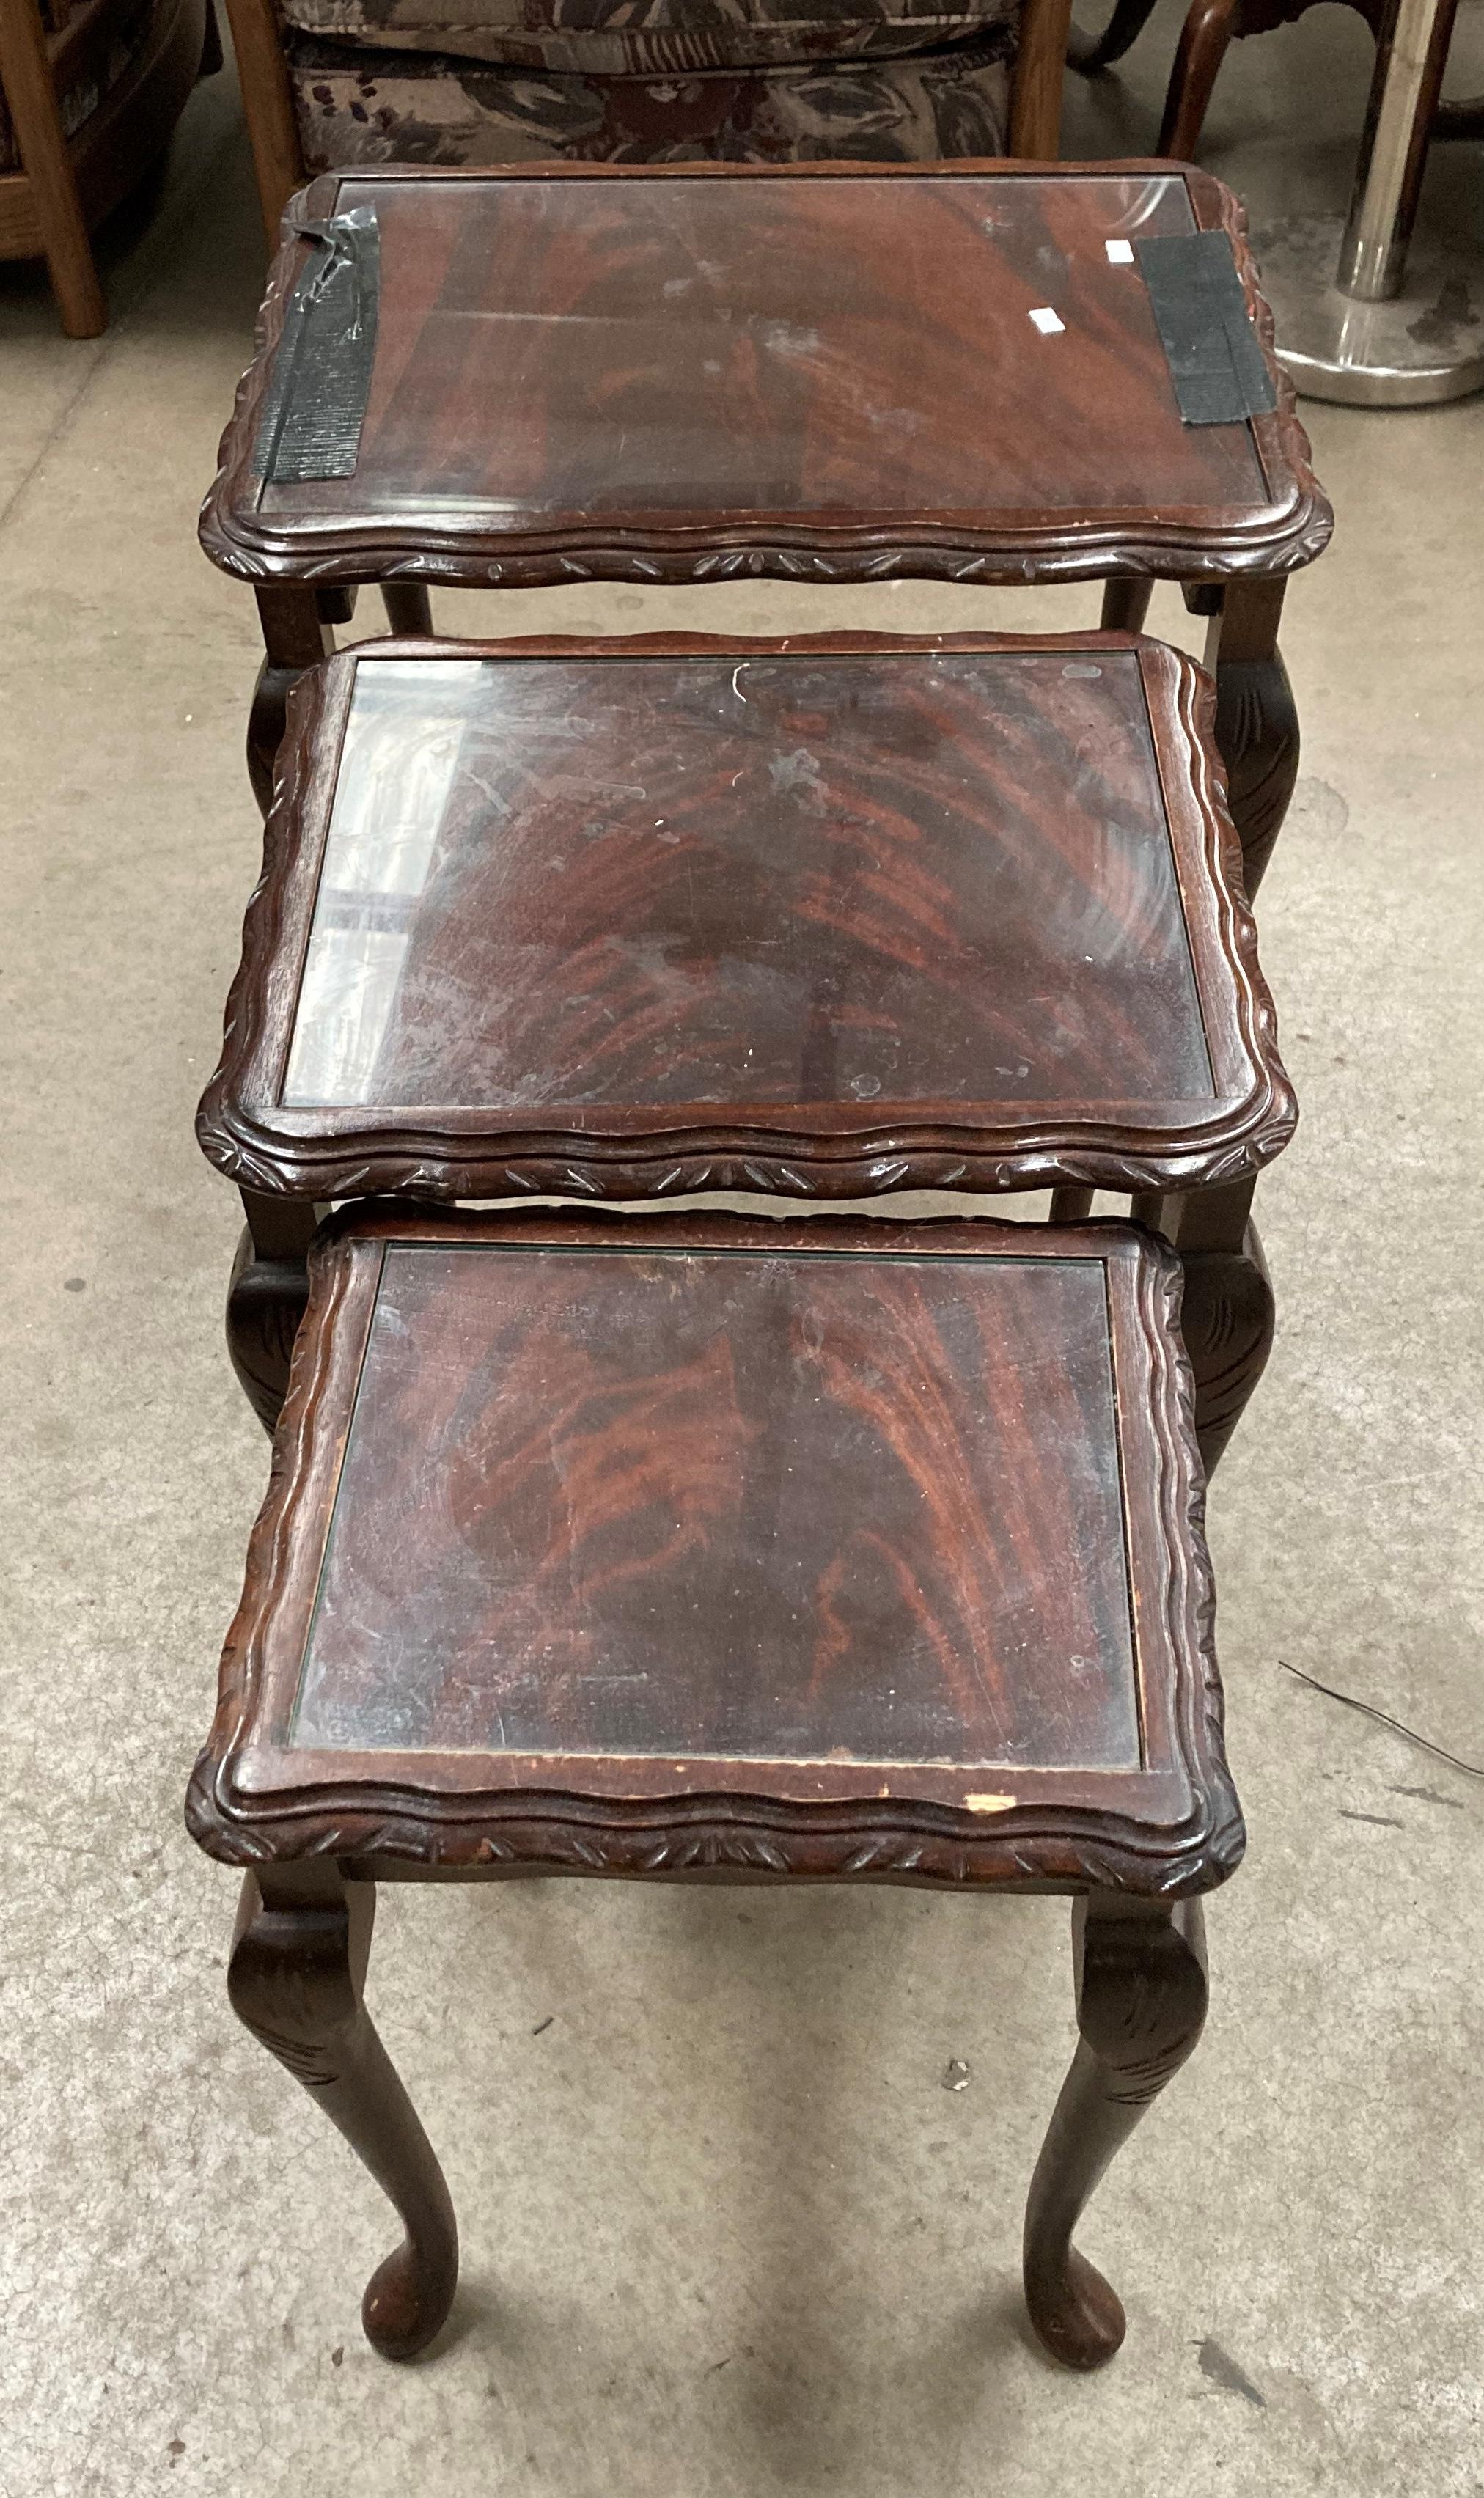 A nest of three mahogany coffee tables with glass inset tops